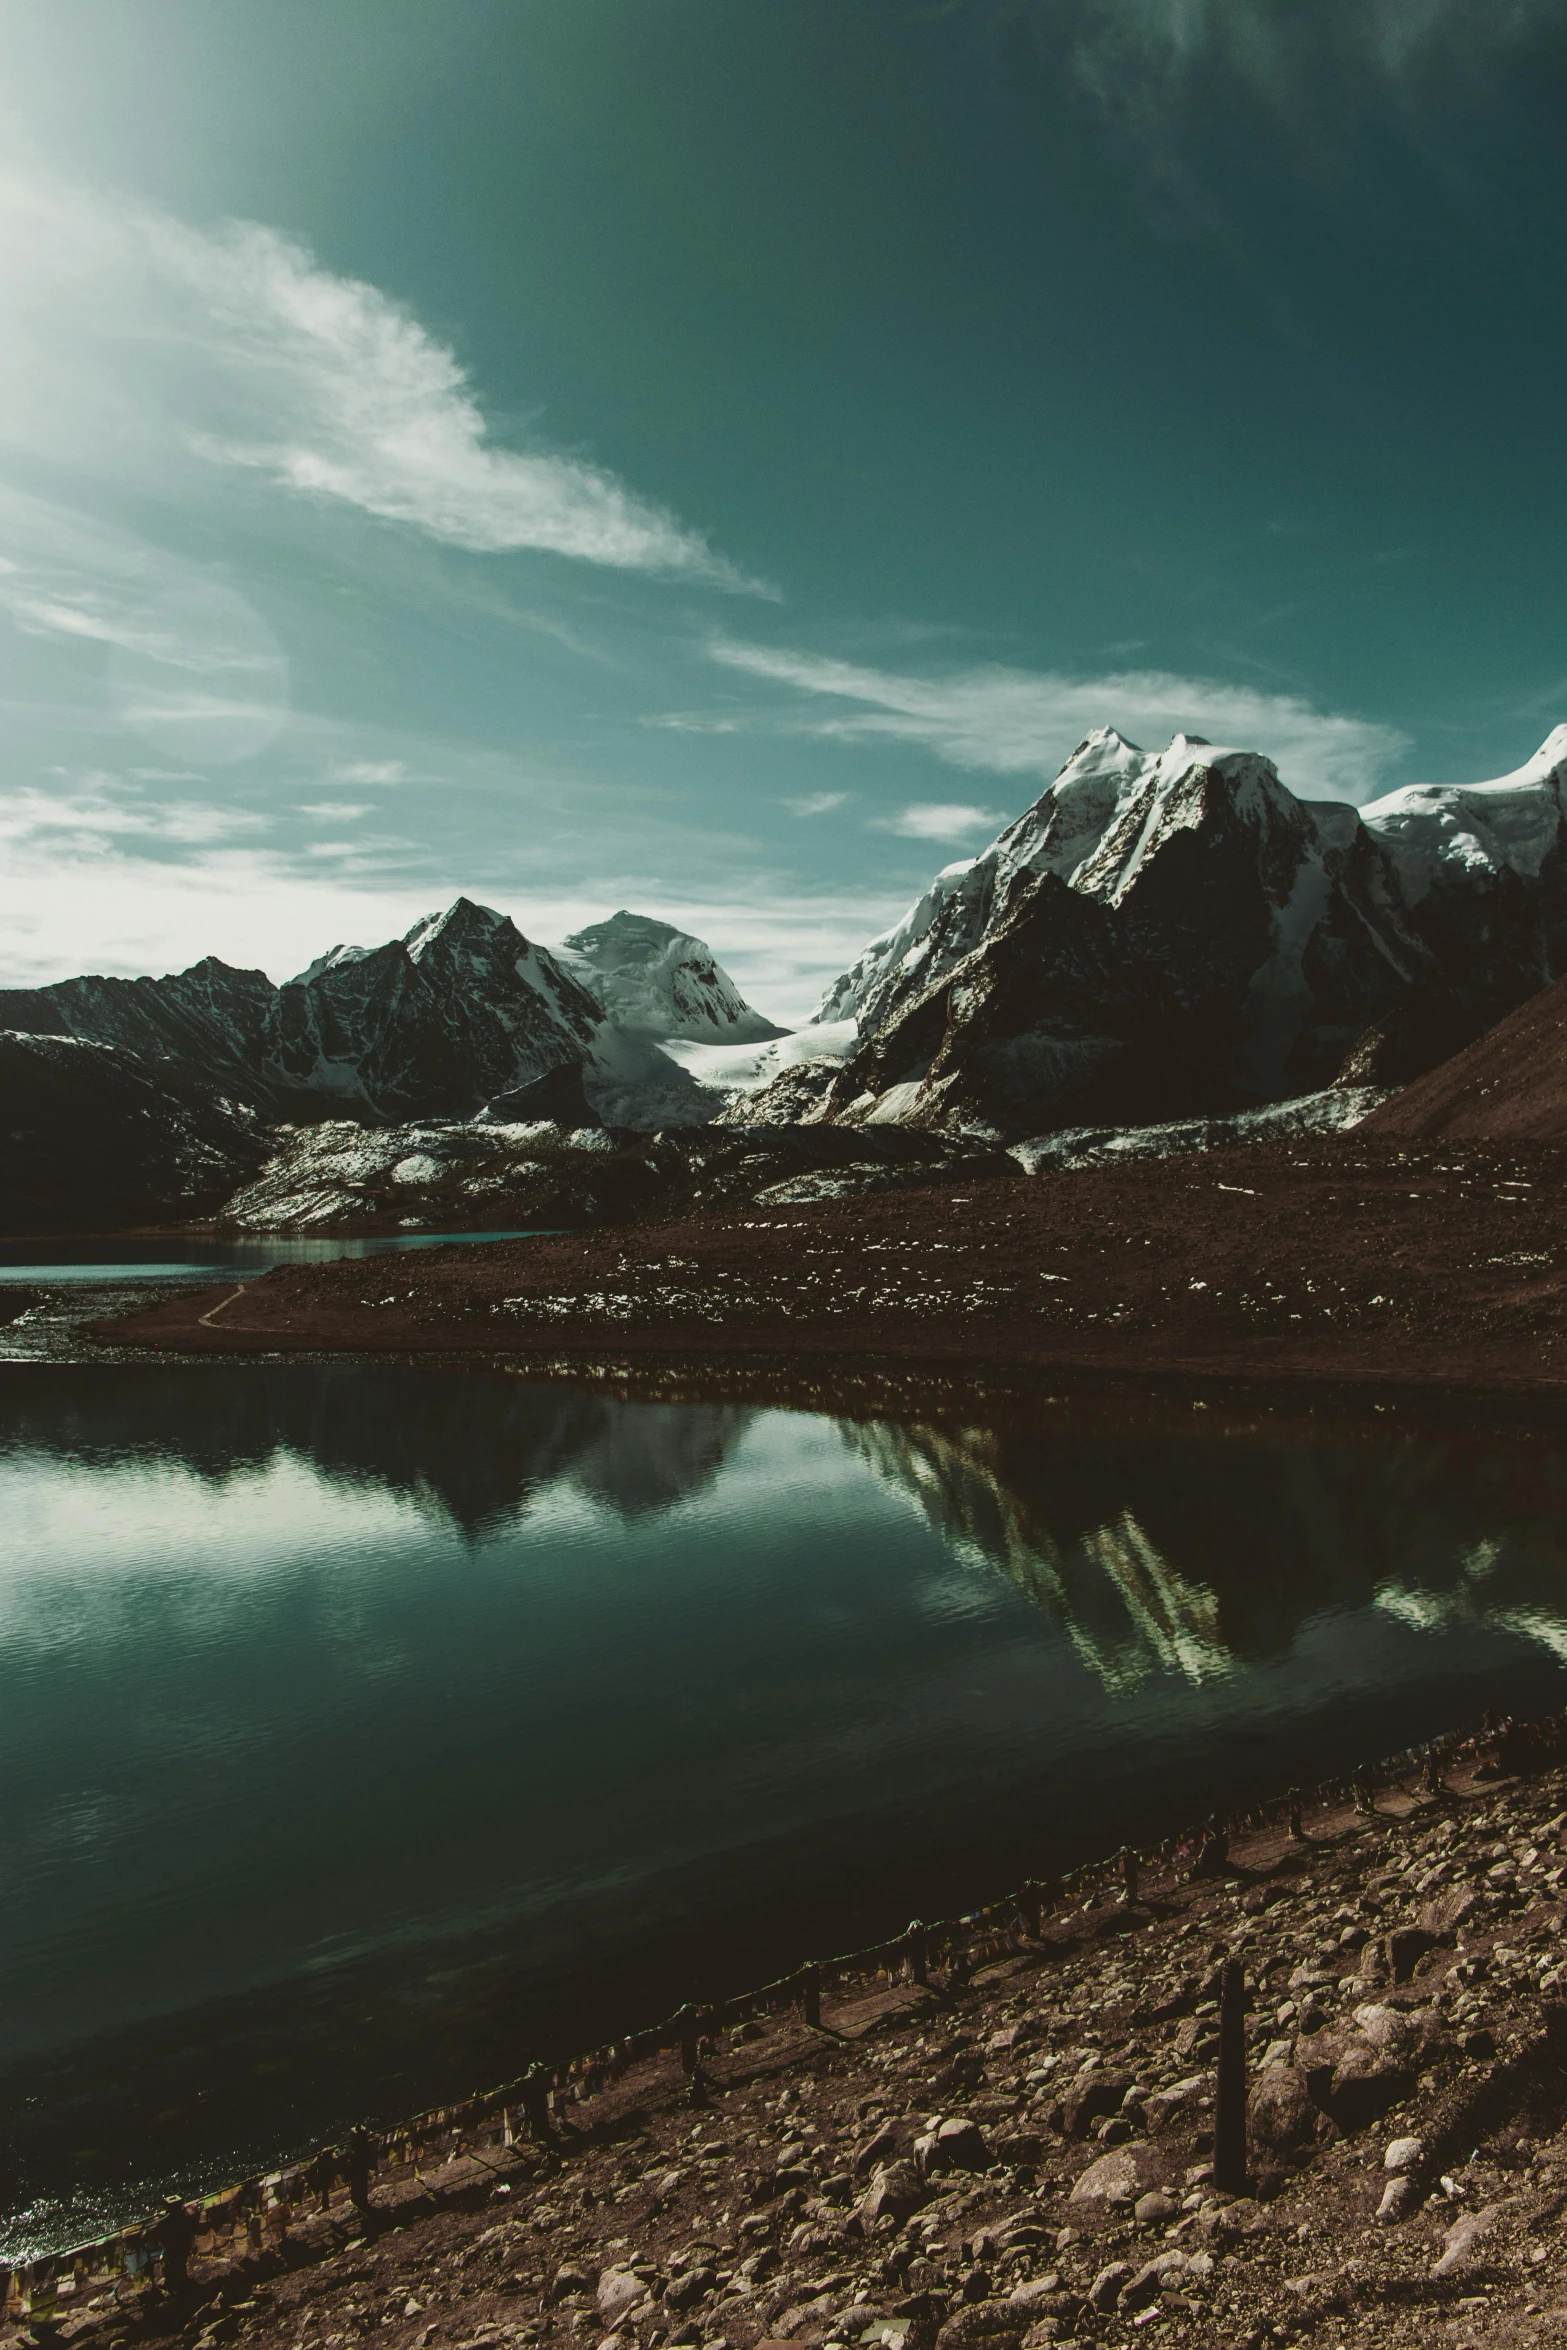 an image of a mountain range reflecting in the water